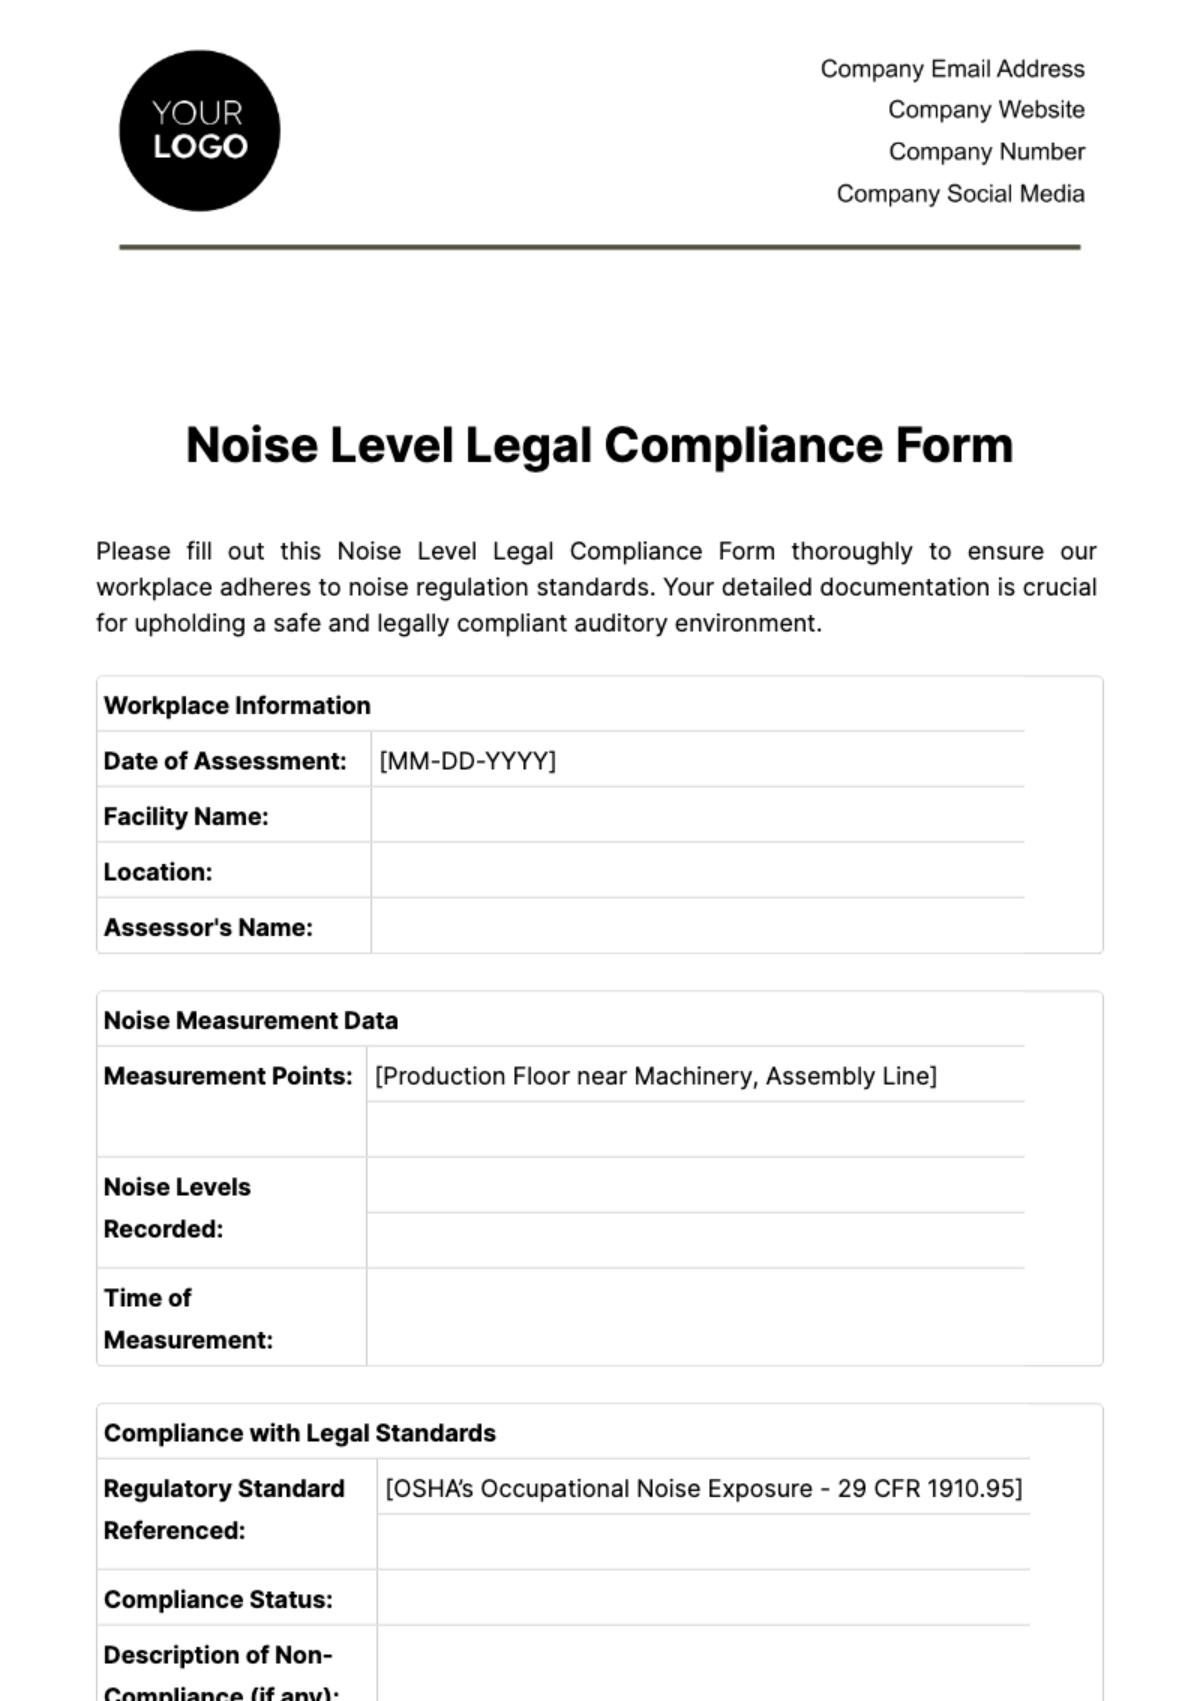 Free Noise Level Legal Compliance Form Template